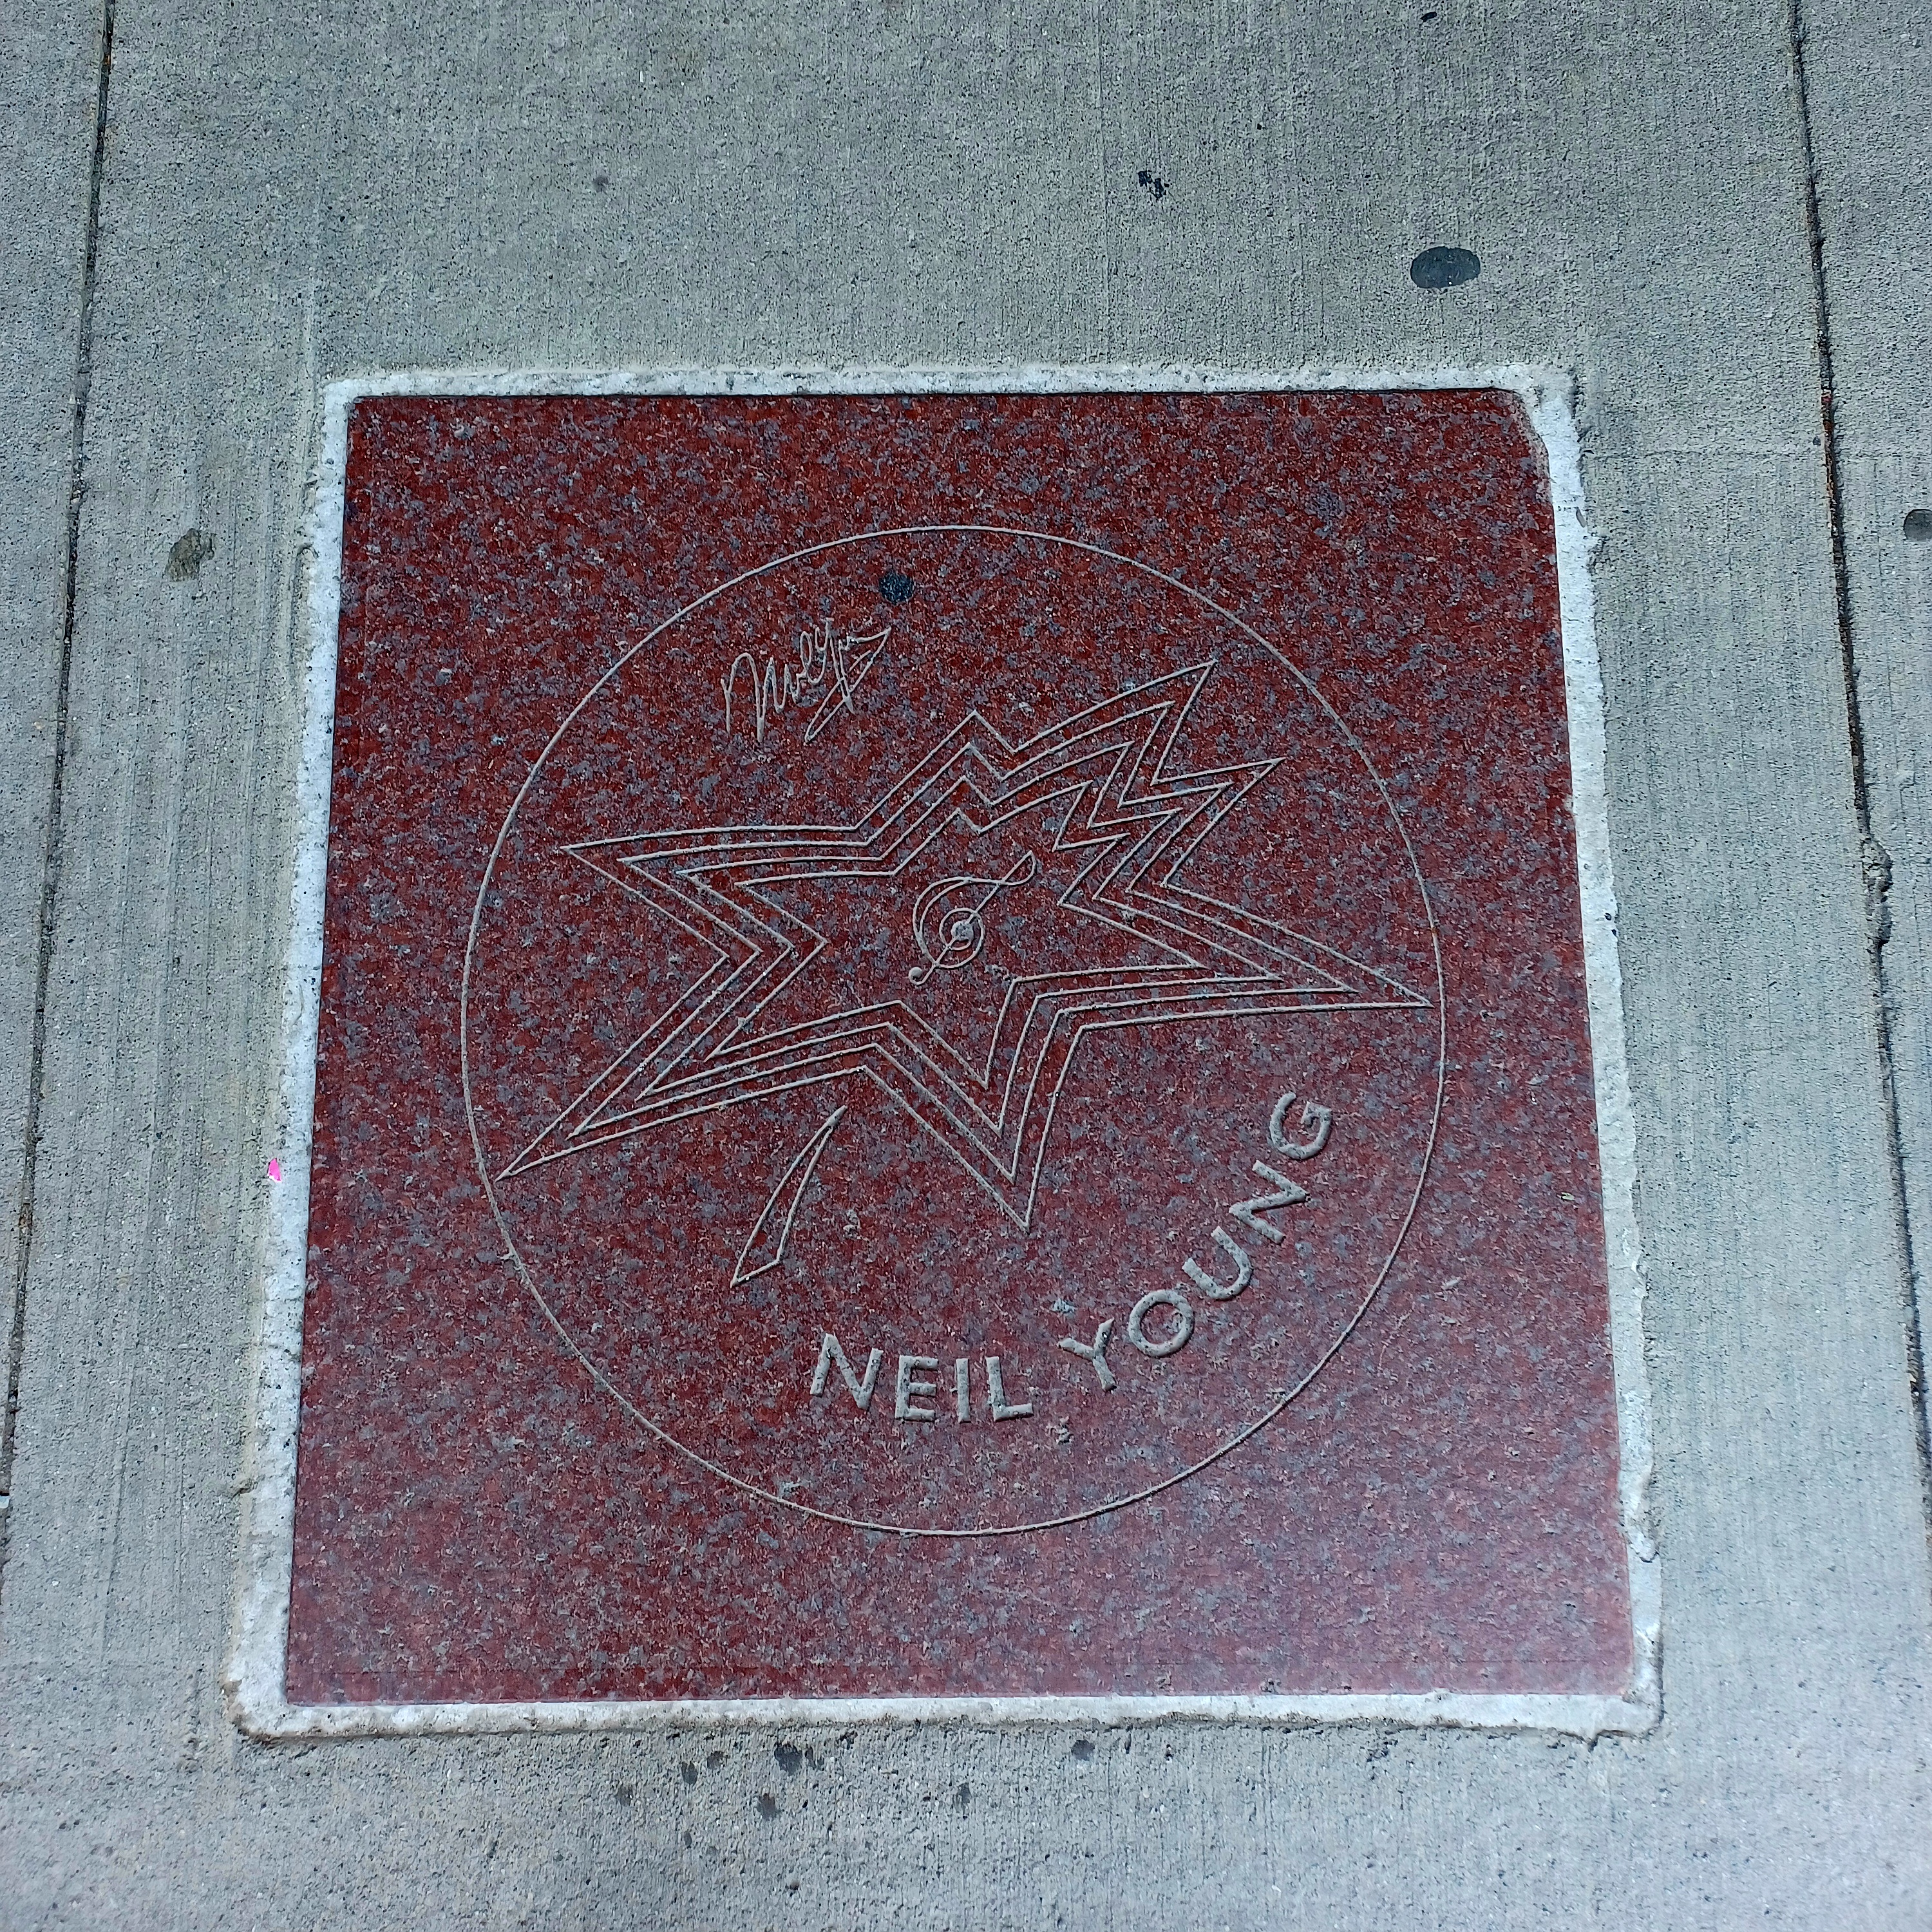 A red star shaped like a maple leaf, that says "Neil Young".